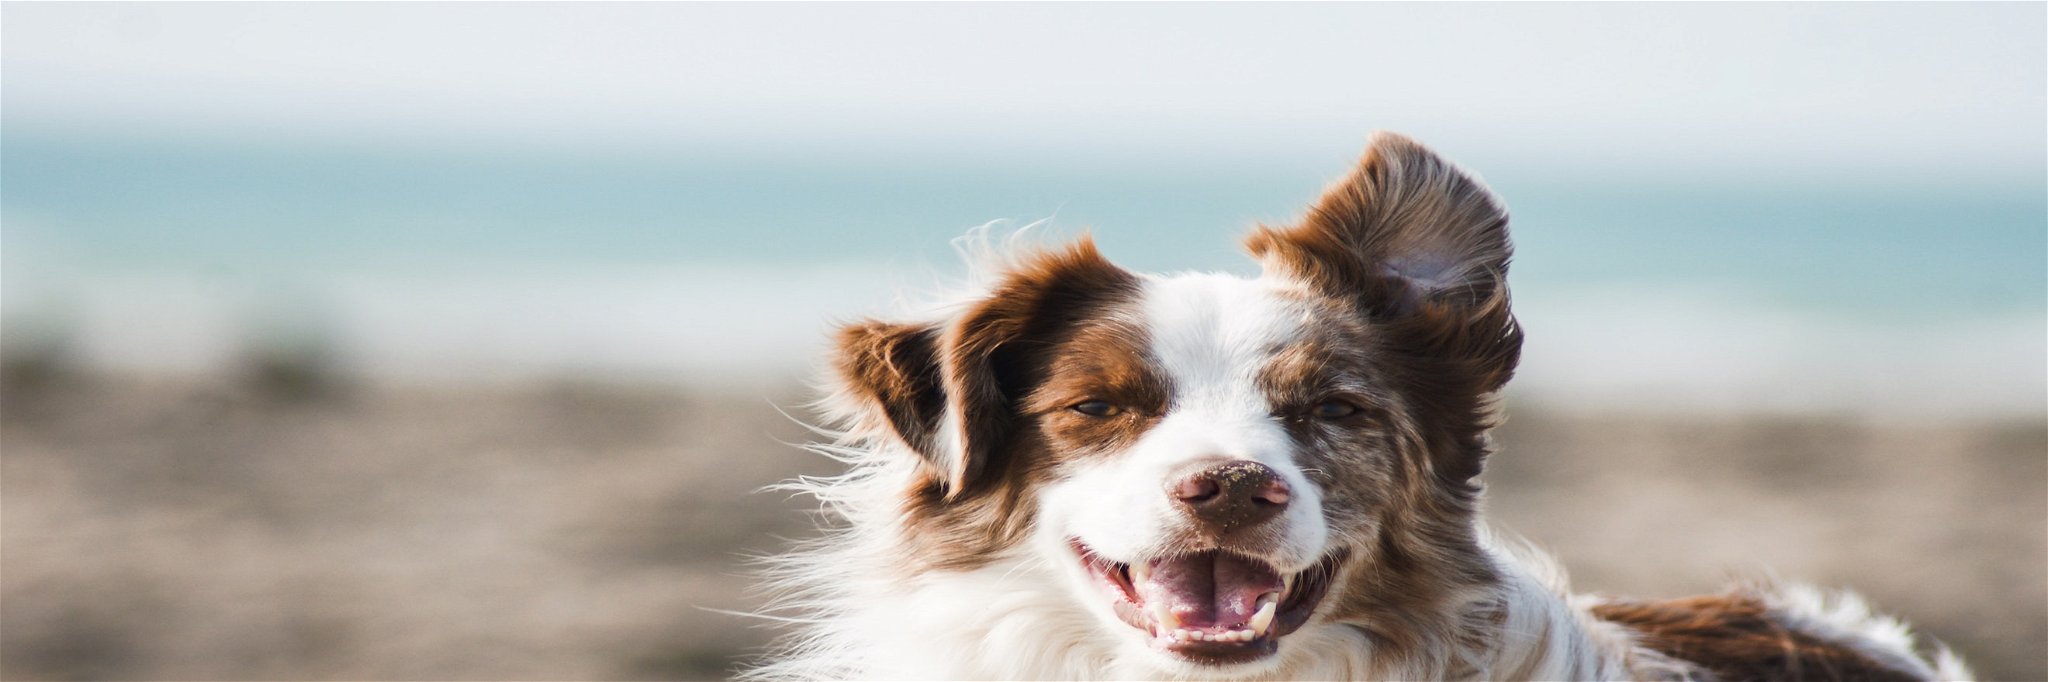 IHG Hotels and Resorts Launch a New Program for Pet Owners&nbsp;